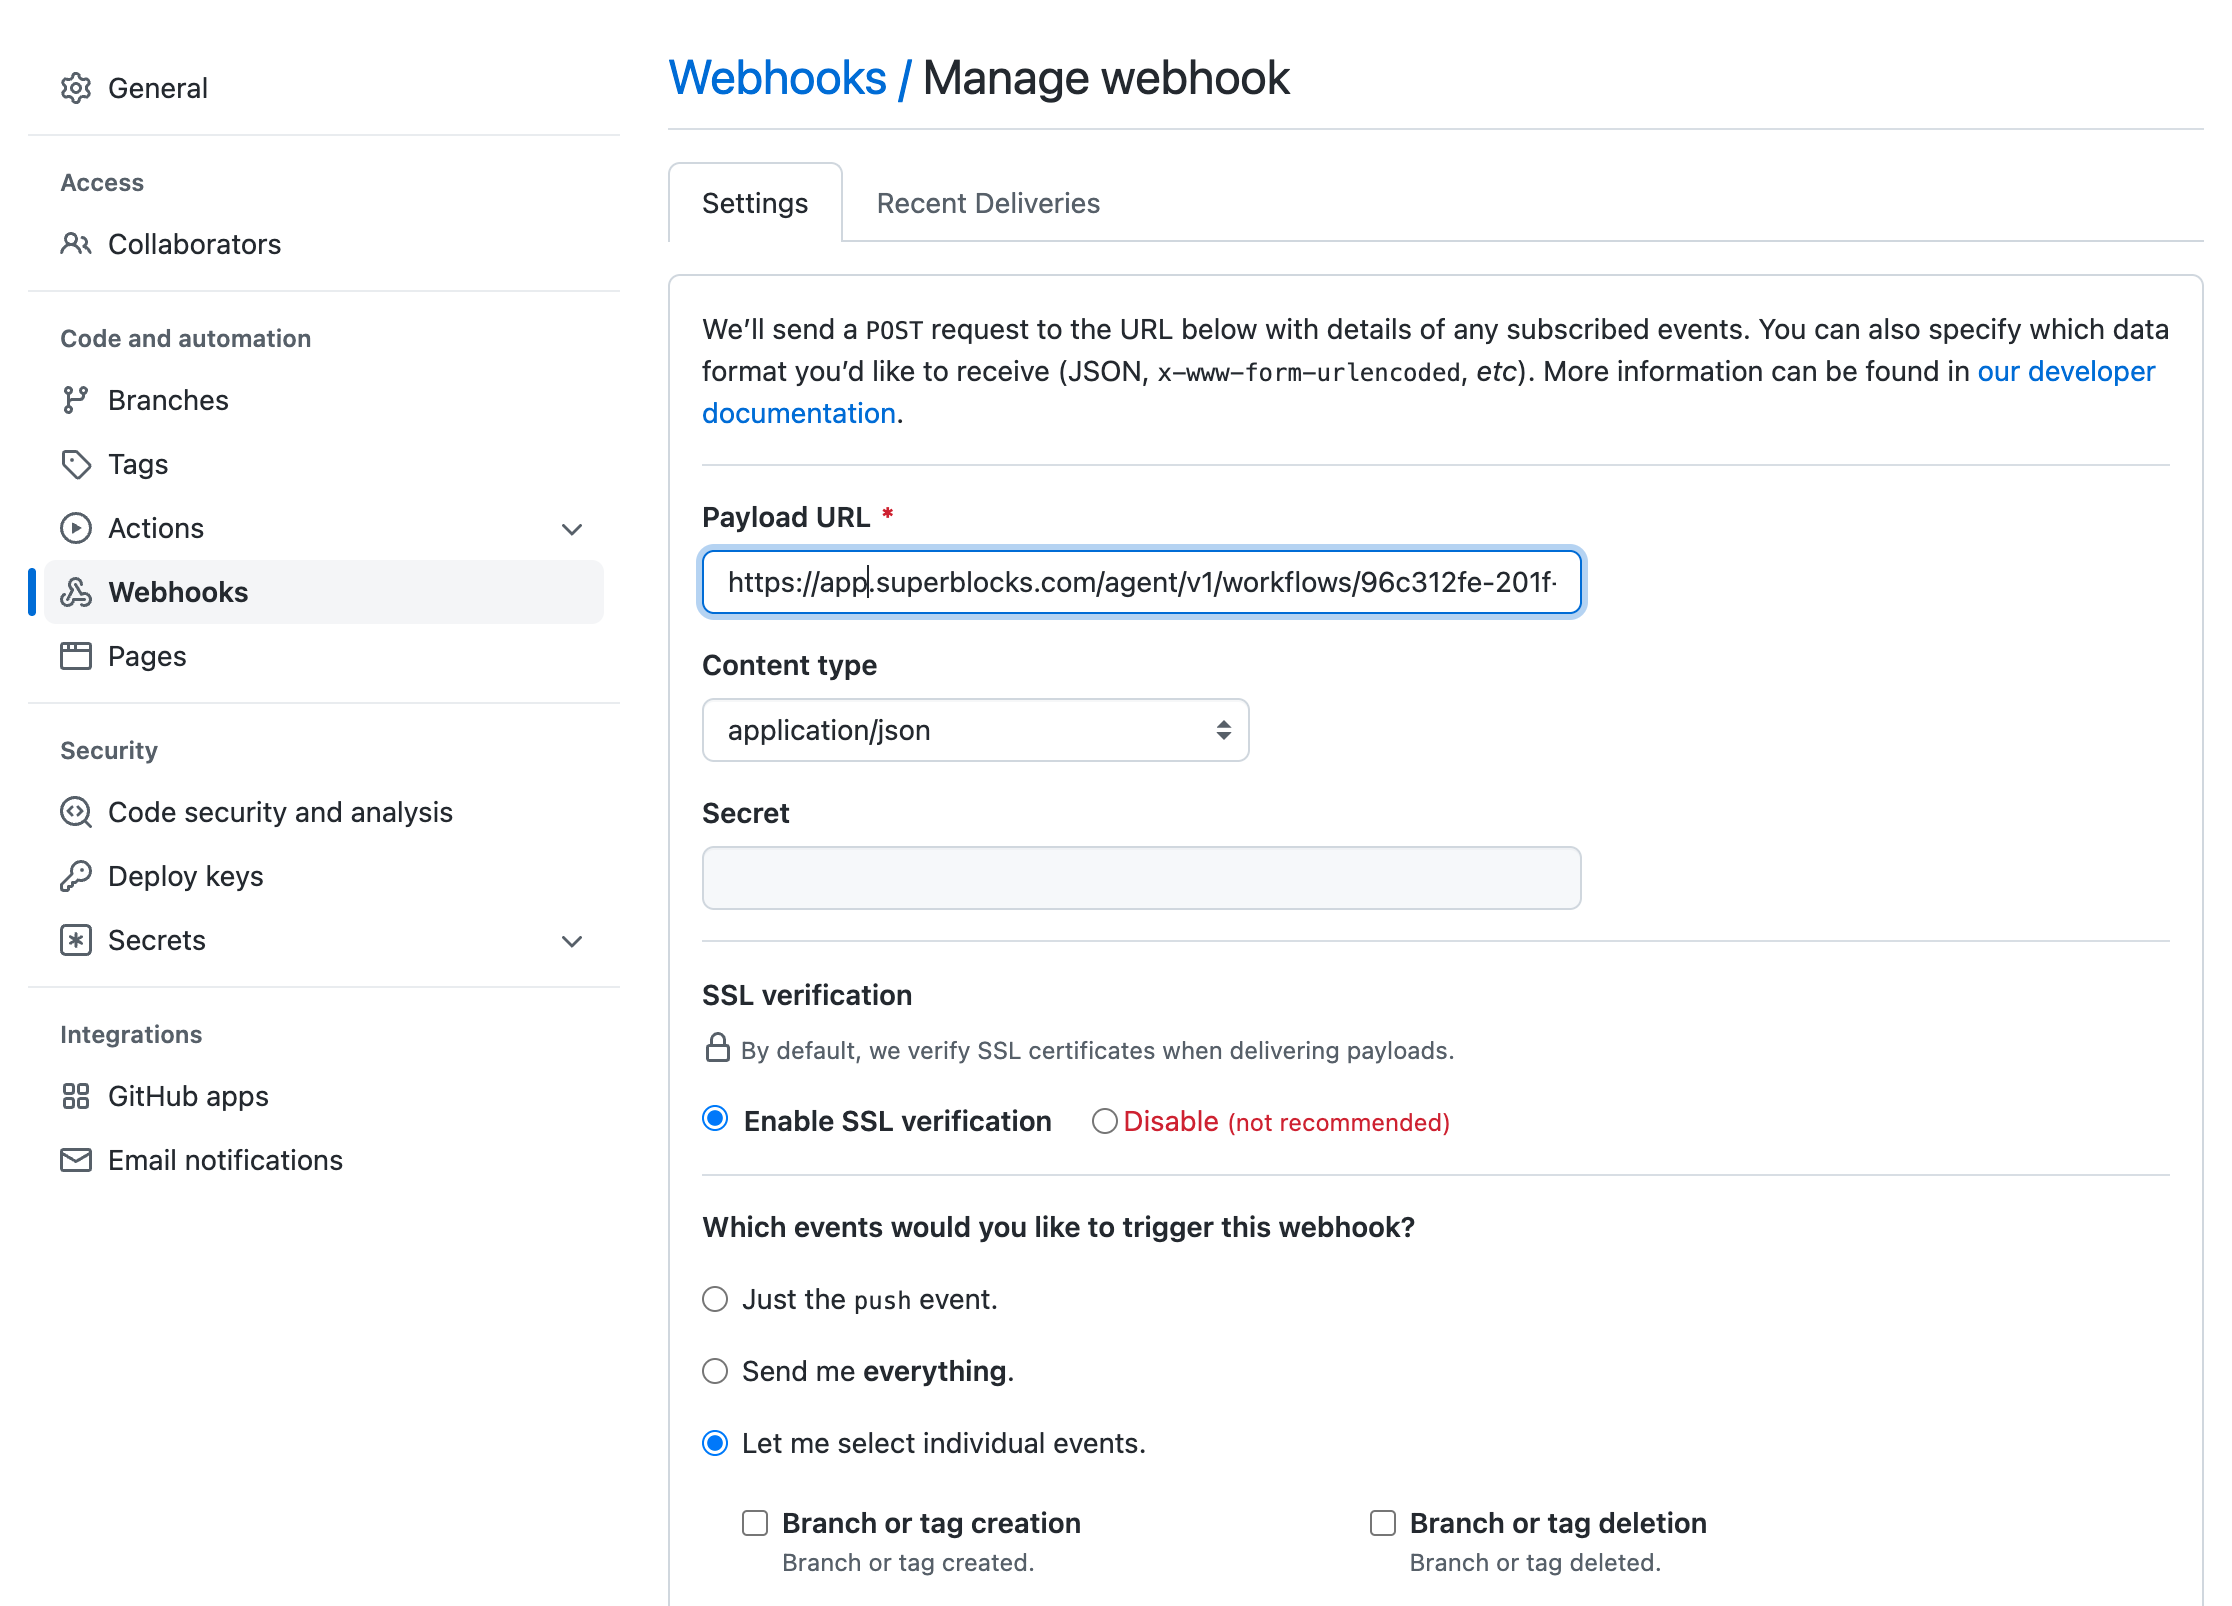 Create webhook in Github to connect to Superblocks workflows